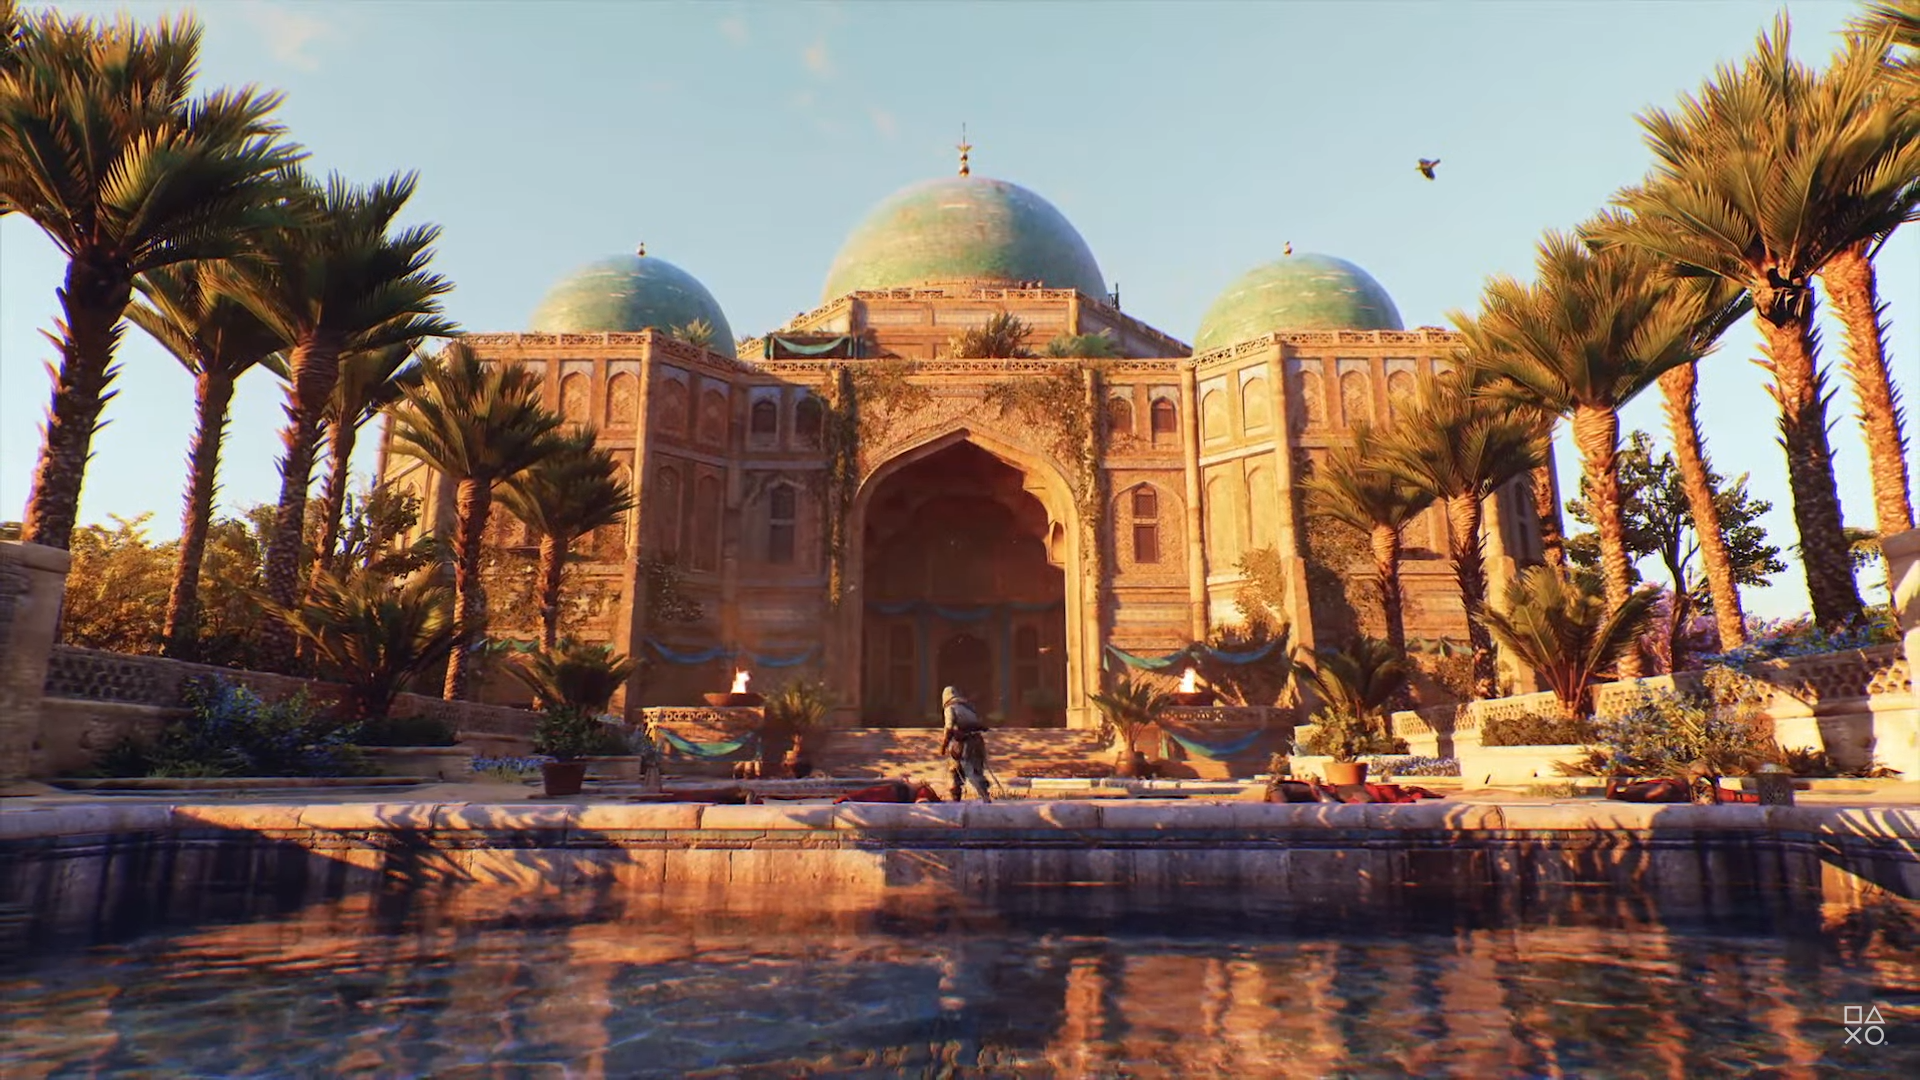 Assassin's Creed Mirage gets new trailer, confirmed Oct. 12 release date